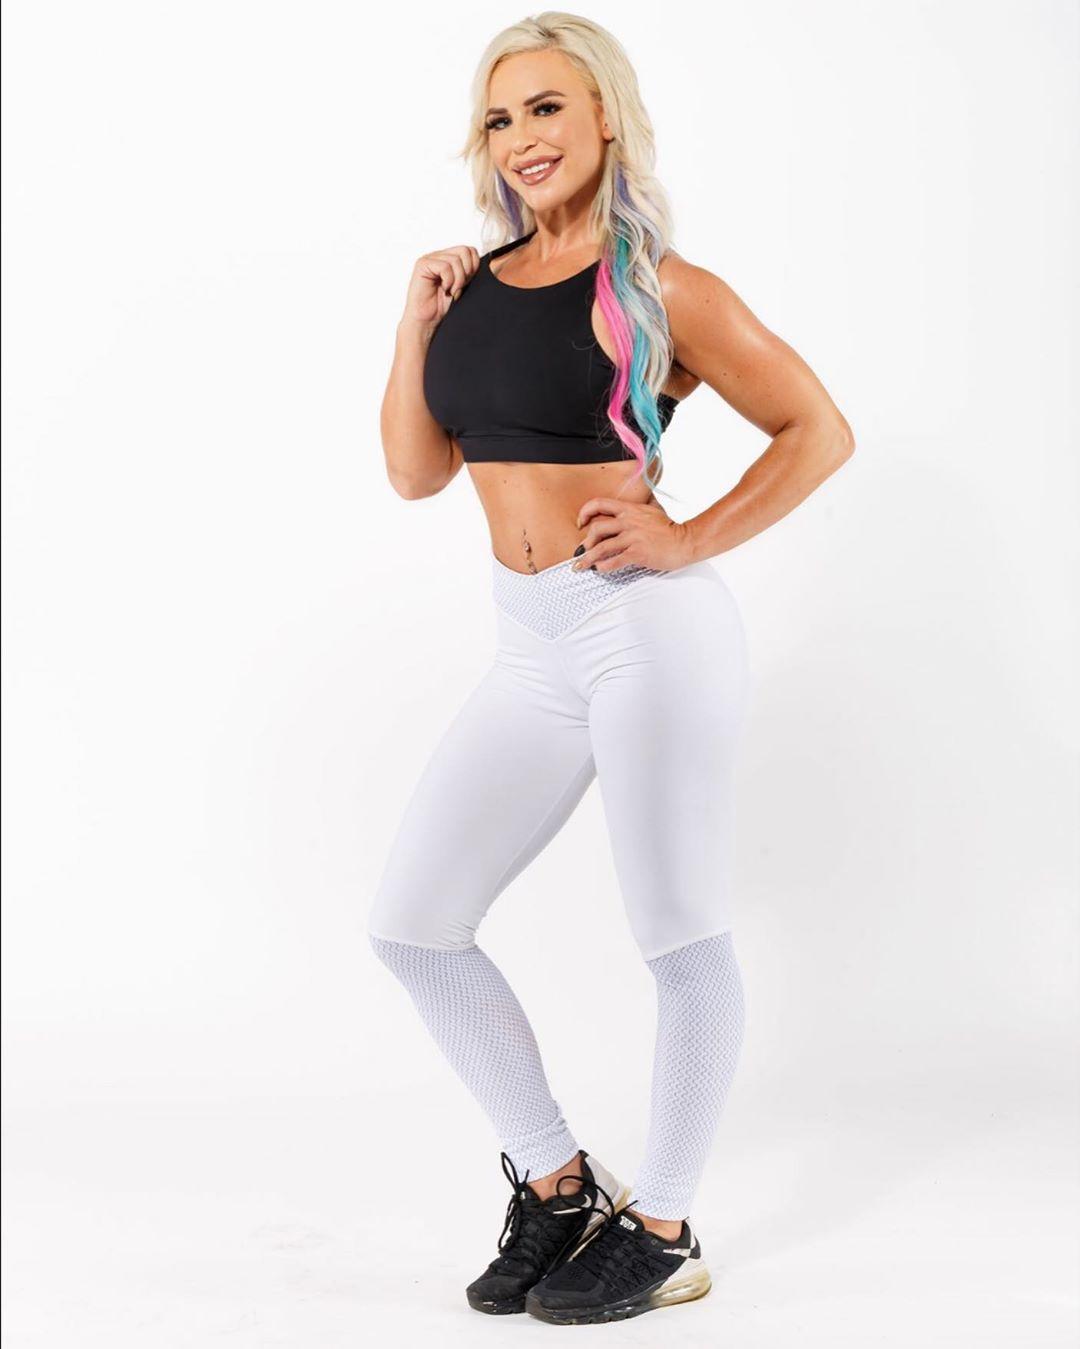 70+ Hot Pictures Of Dana Brooke Show Off This WWE Diva’s Sexy Body 482